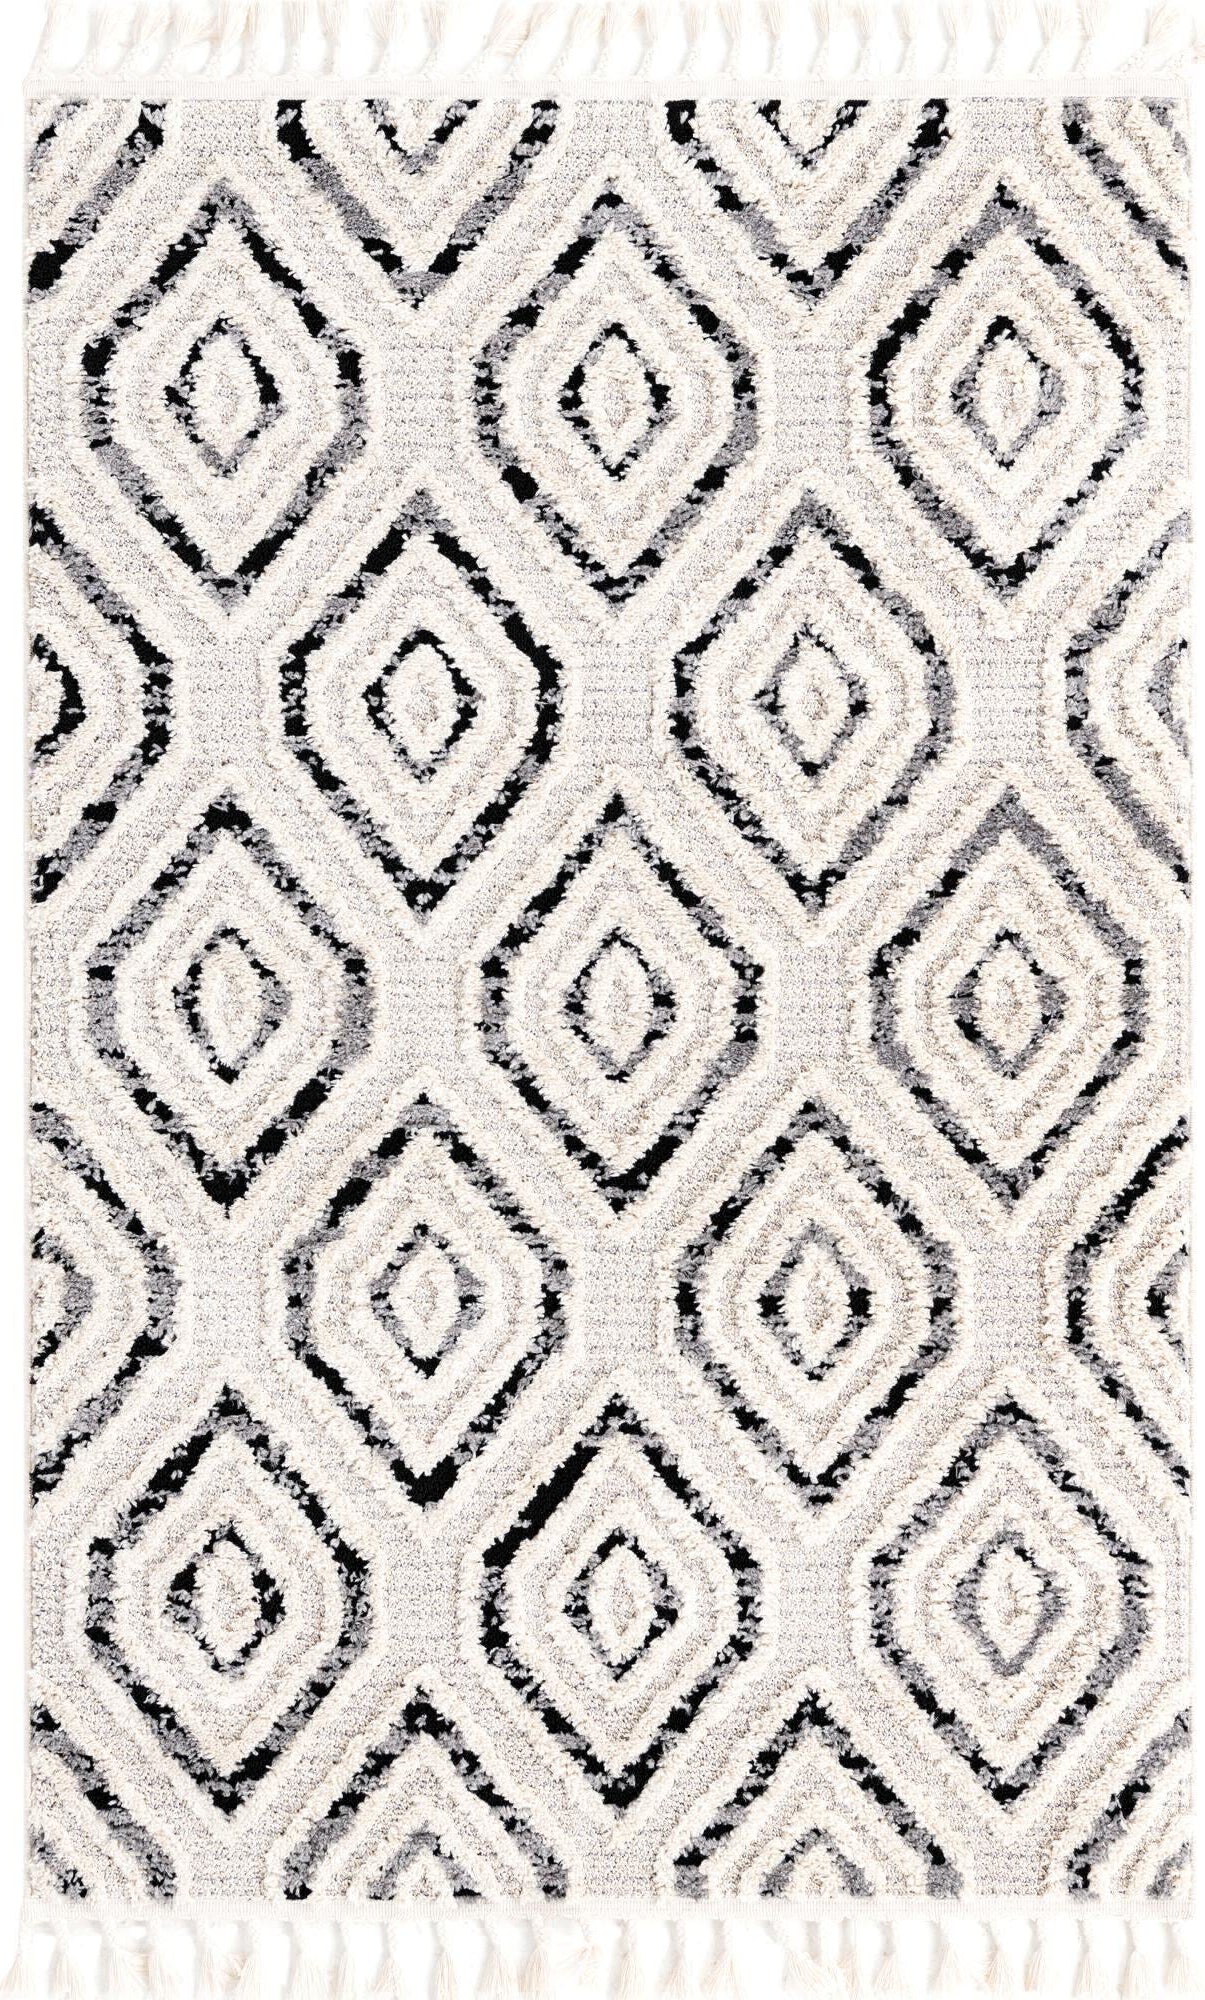 Unique Loom Cherokee T-CHRK5 Black and White Area Rug main image